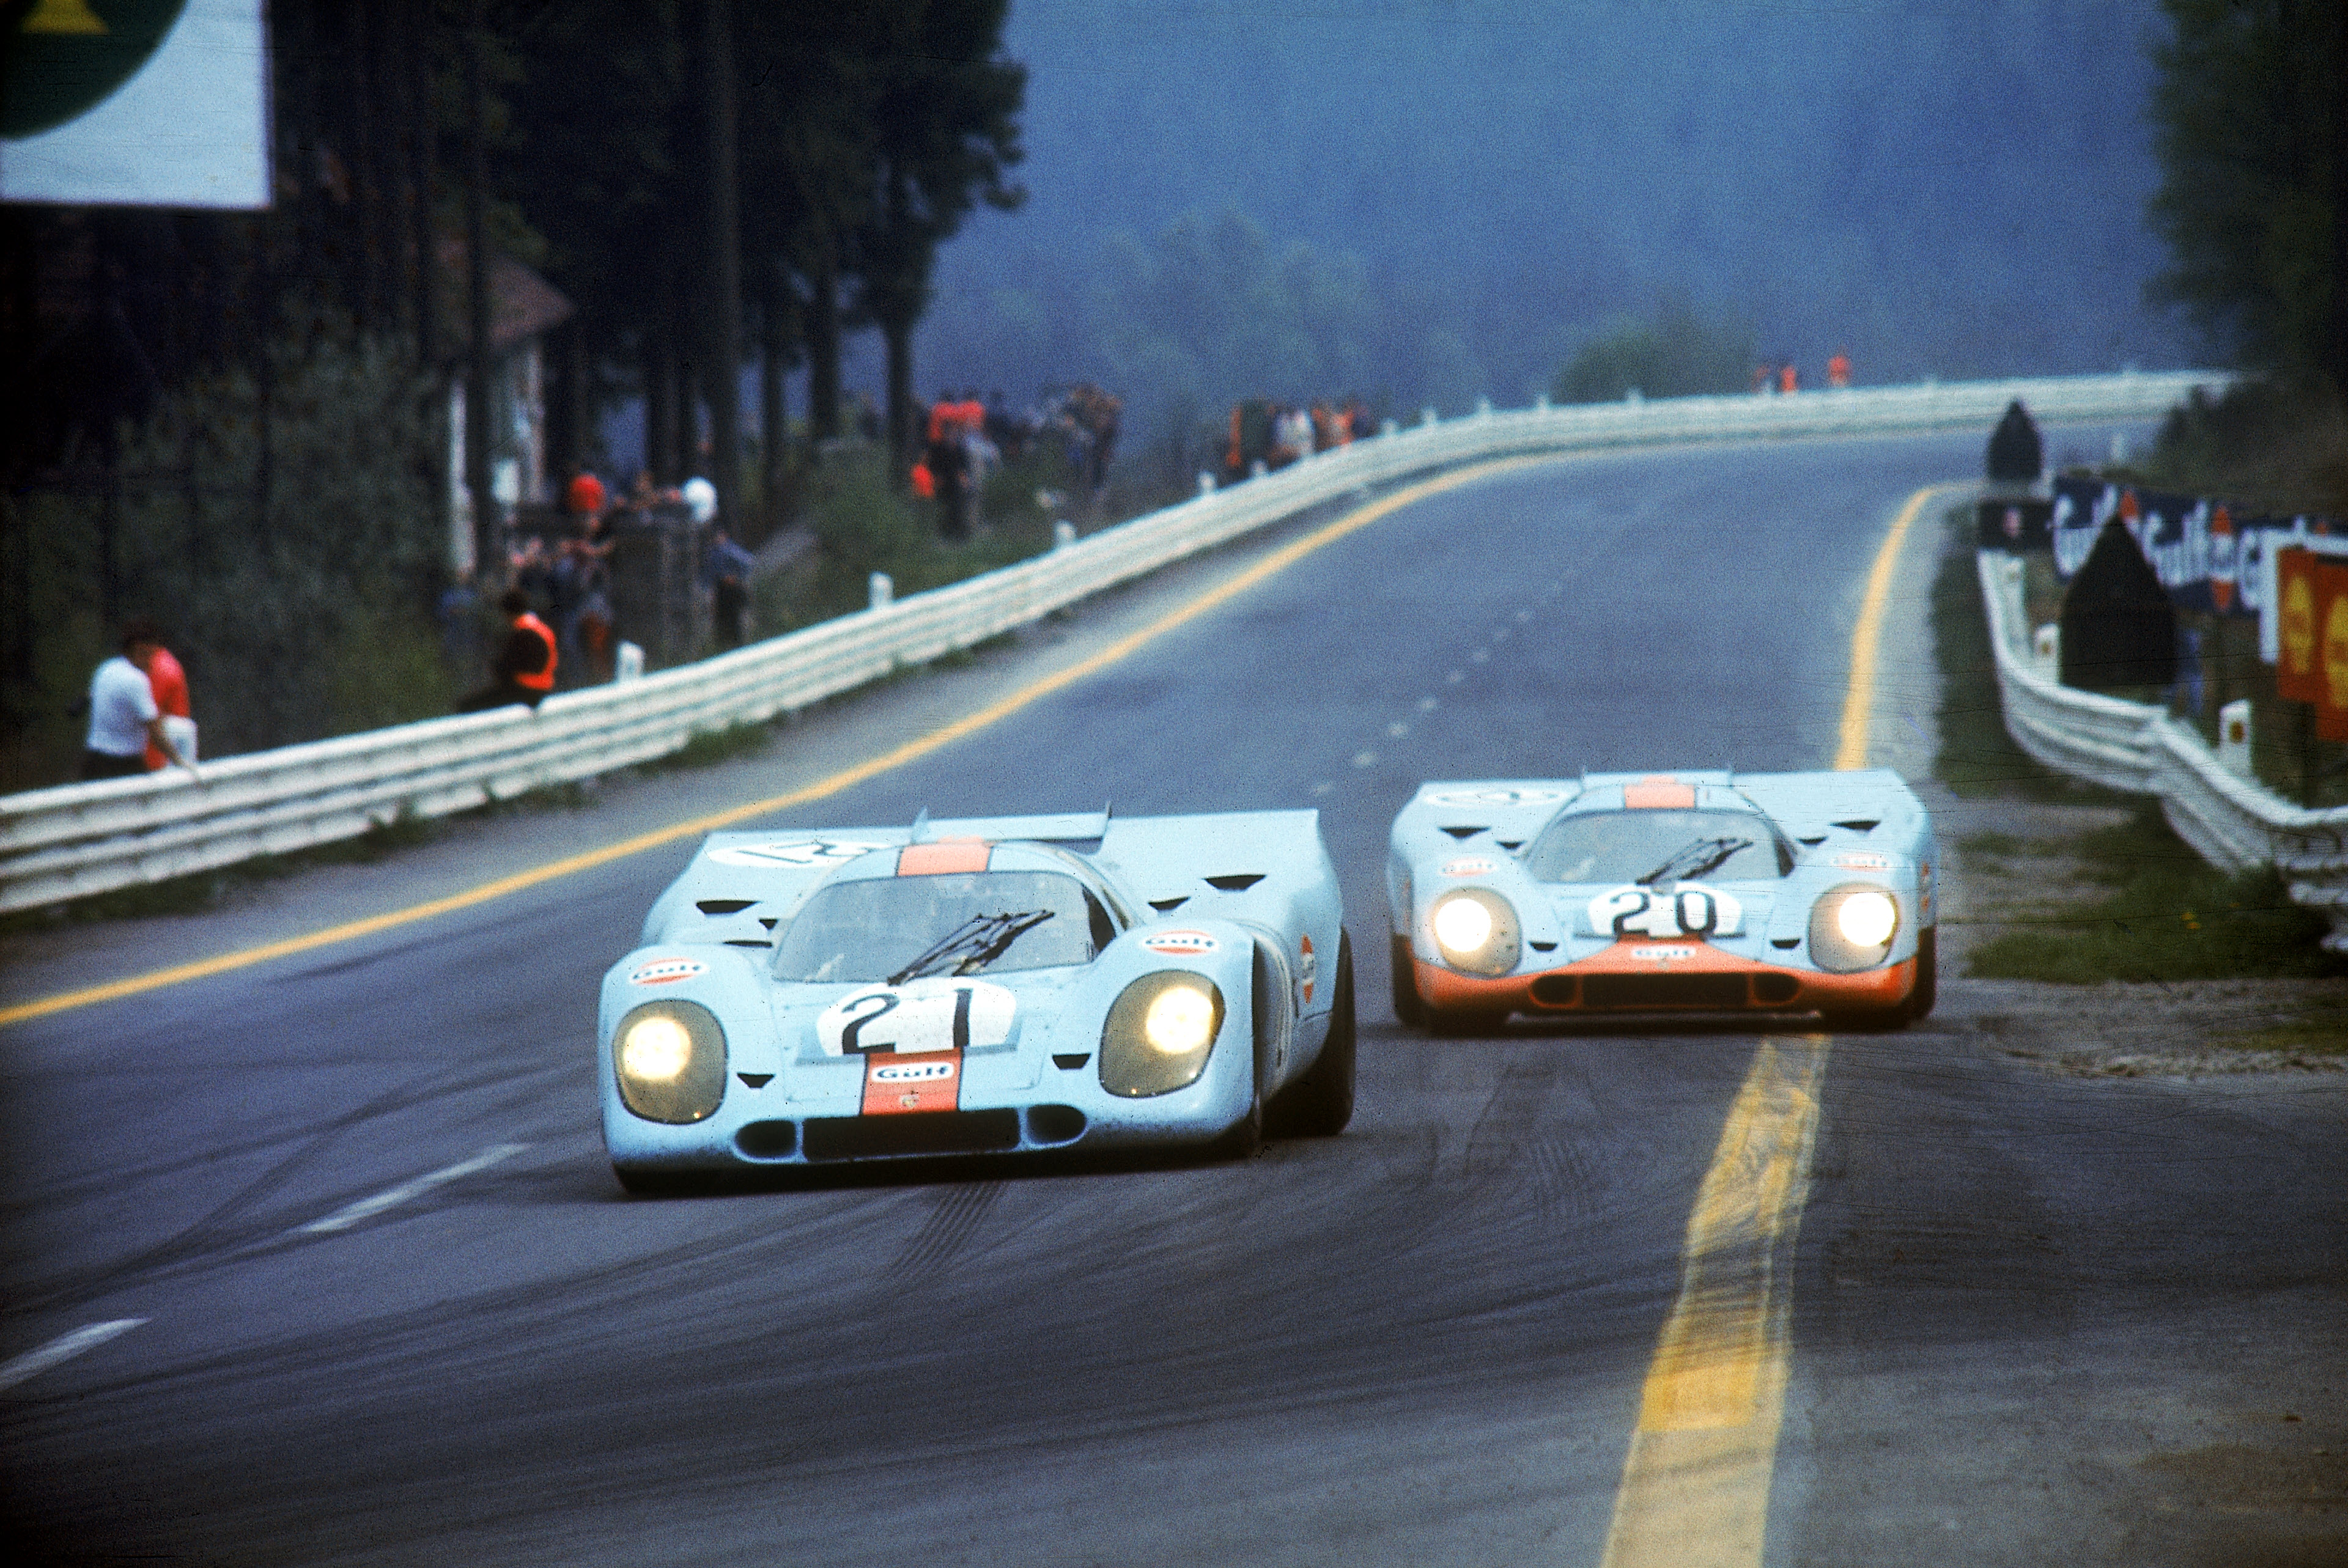 General 3840x2565 Spa-Francorchamps race cars racing race tracks longtail Porsche German cars Volkswagen Group people headlights Porsche 917 frontal view driving